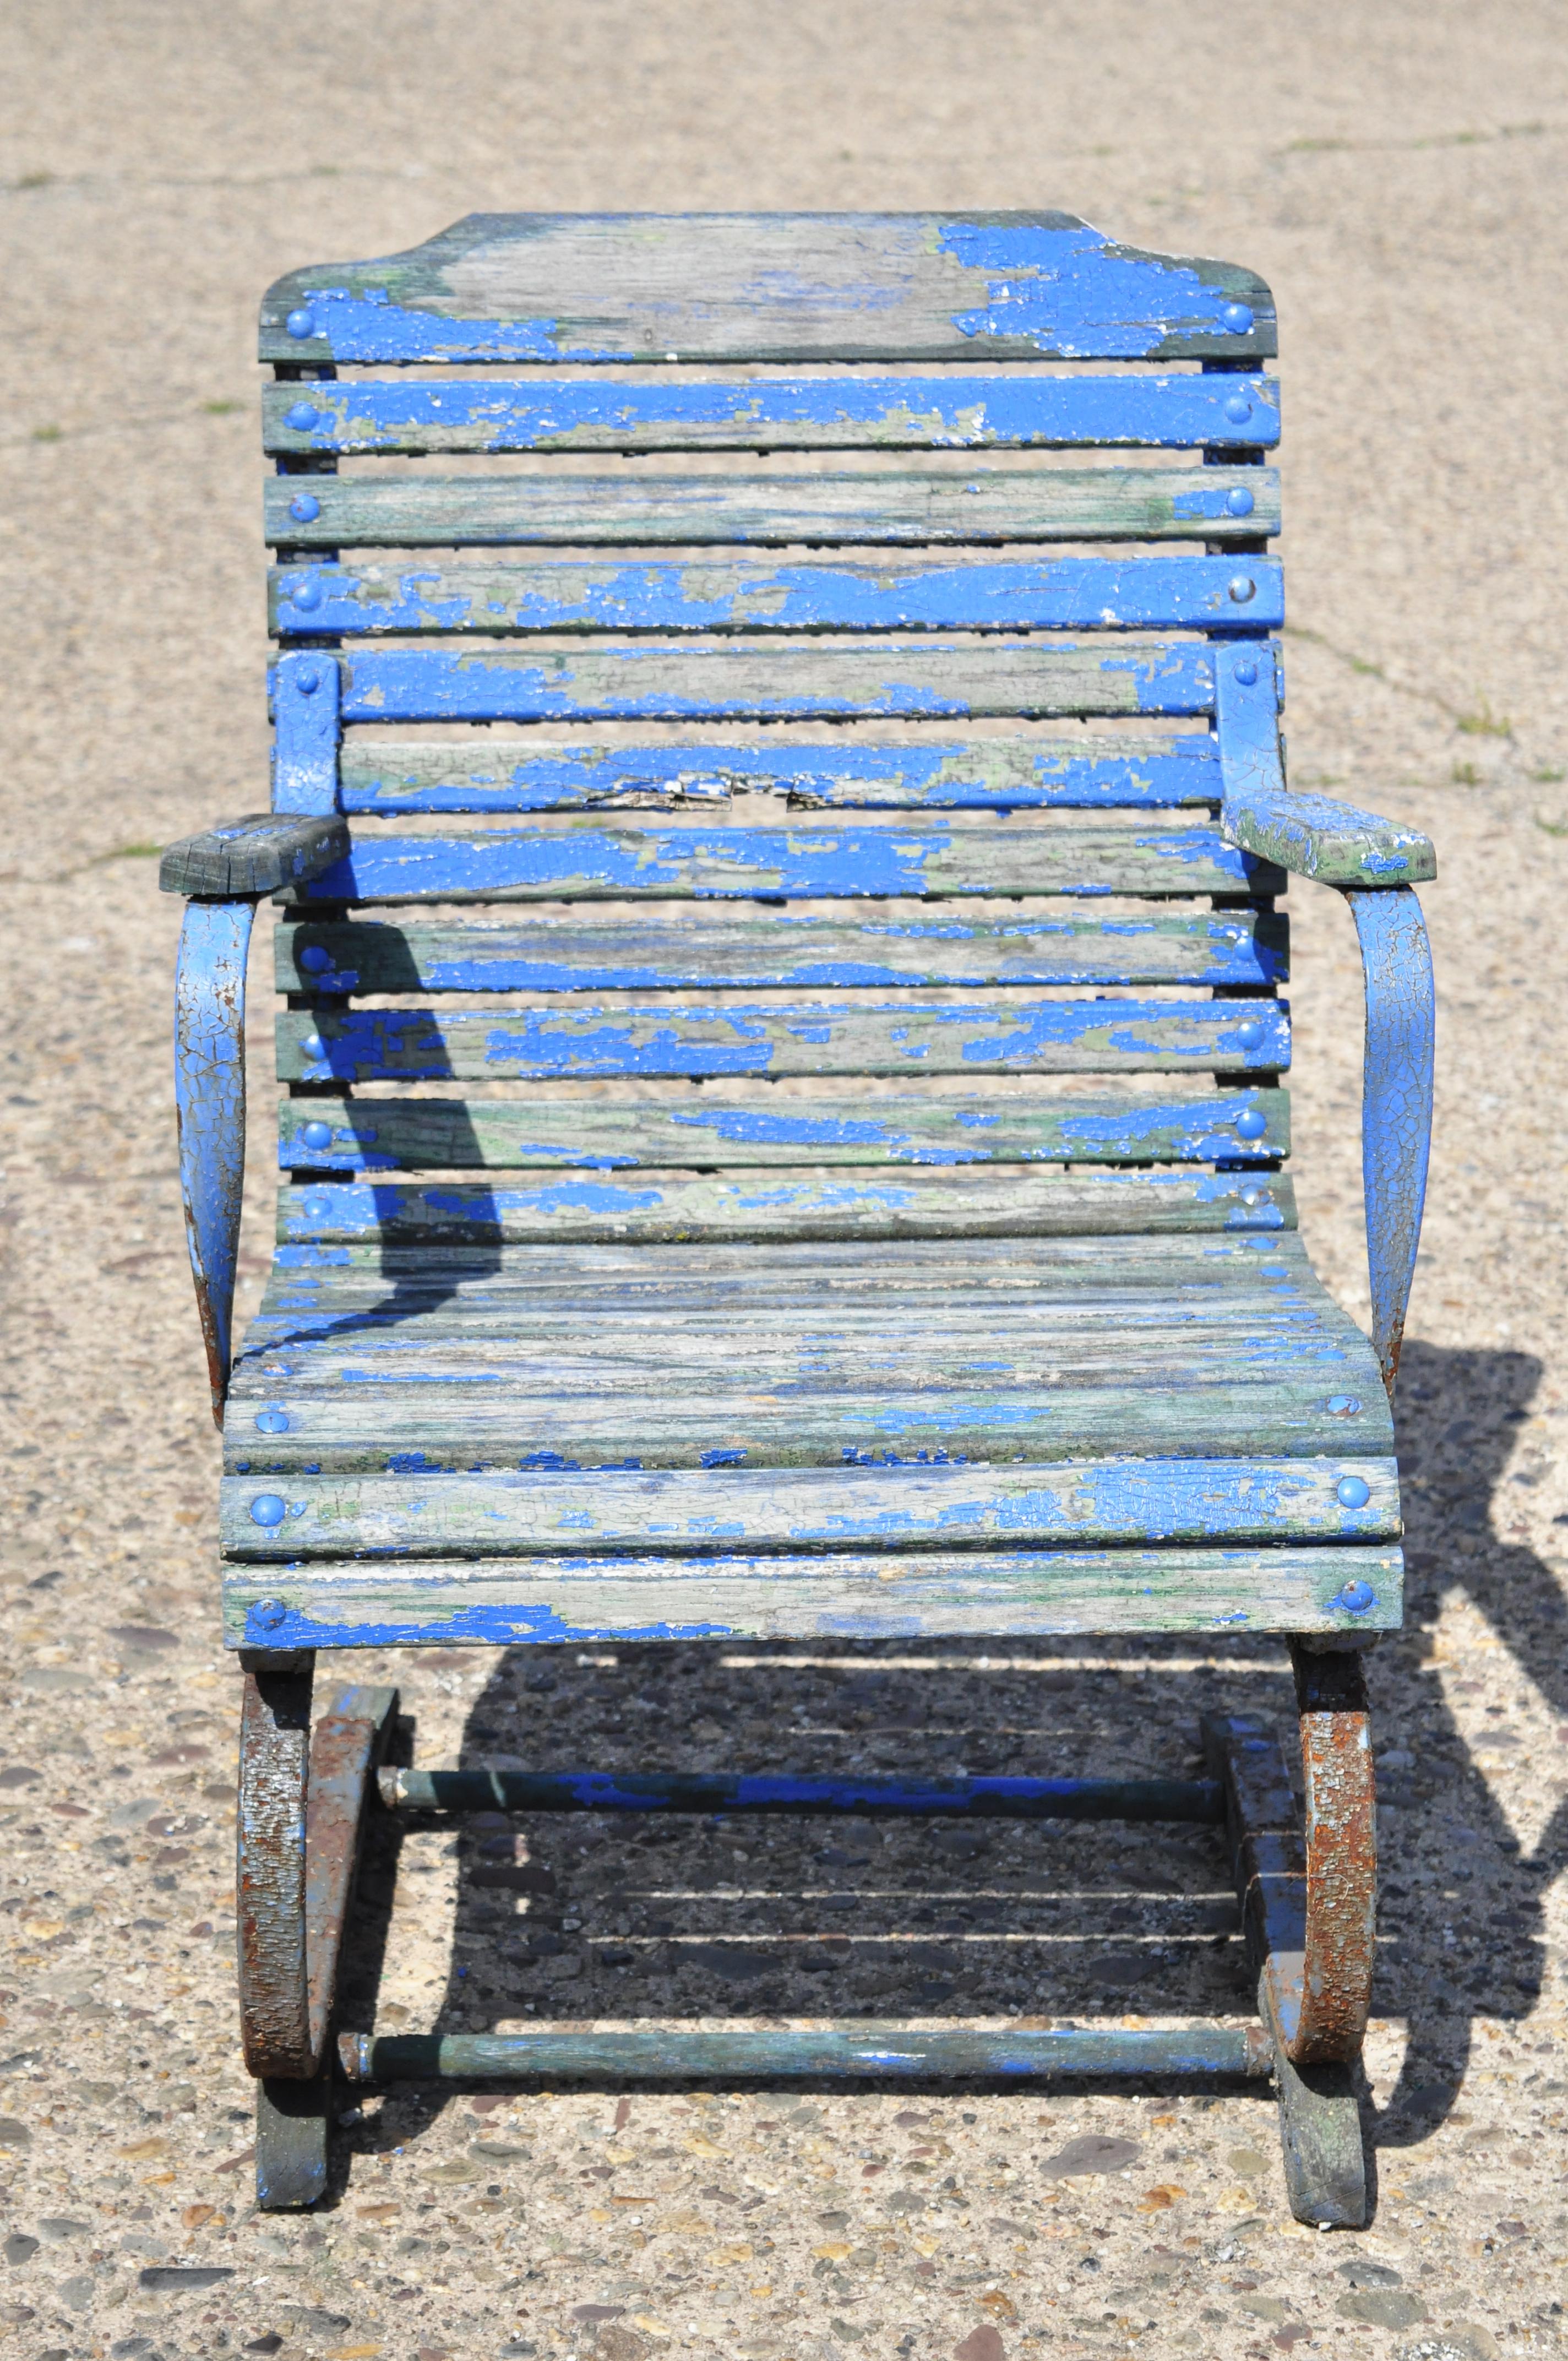 Antique distressed blue painted wooden slat wrought iron frame Art Deco bouncer chair. Item features wooden slats, wrought iron bouncer frame with wooden runners, distressed finish, very nice antique item. Circa early to mid 1900s. Measurements: